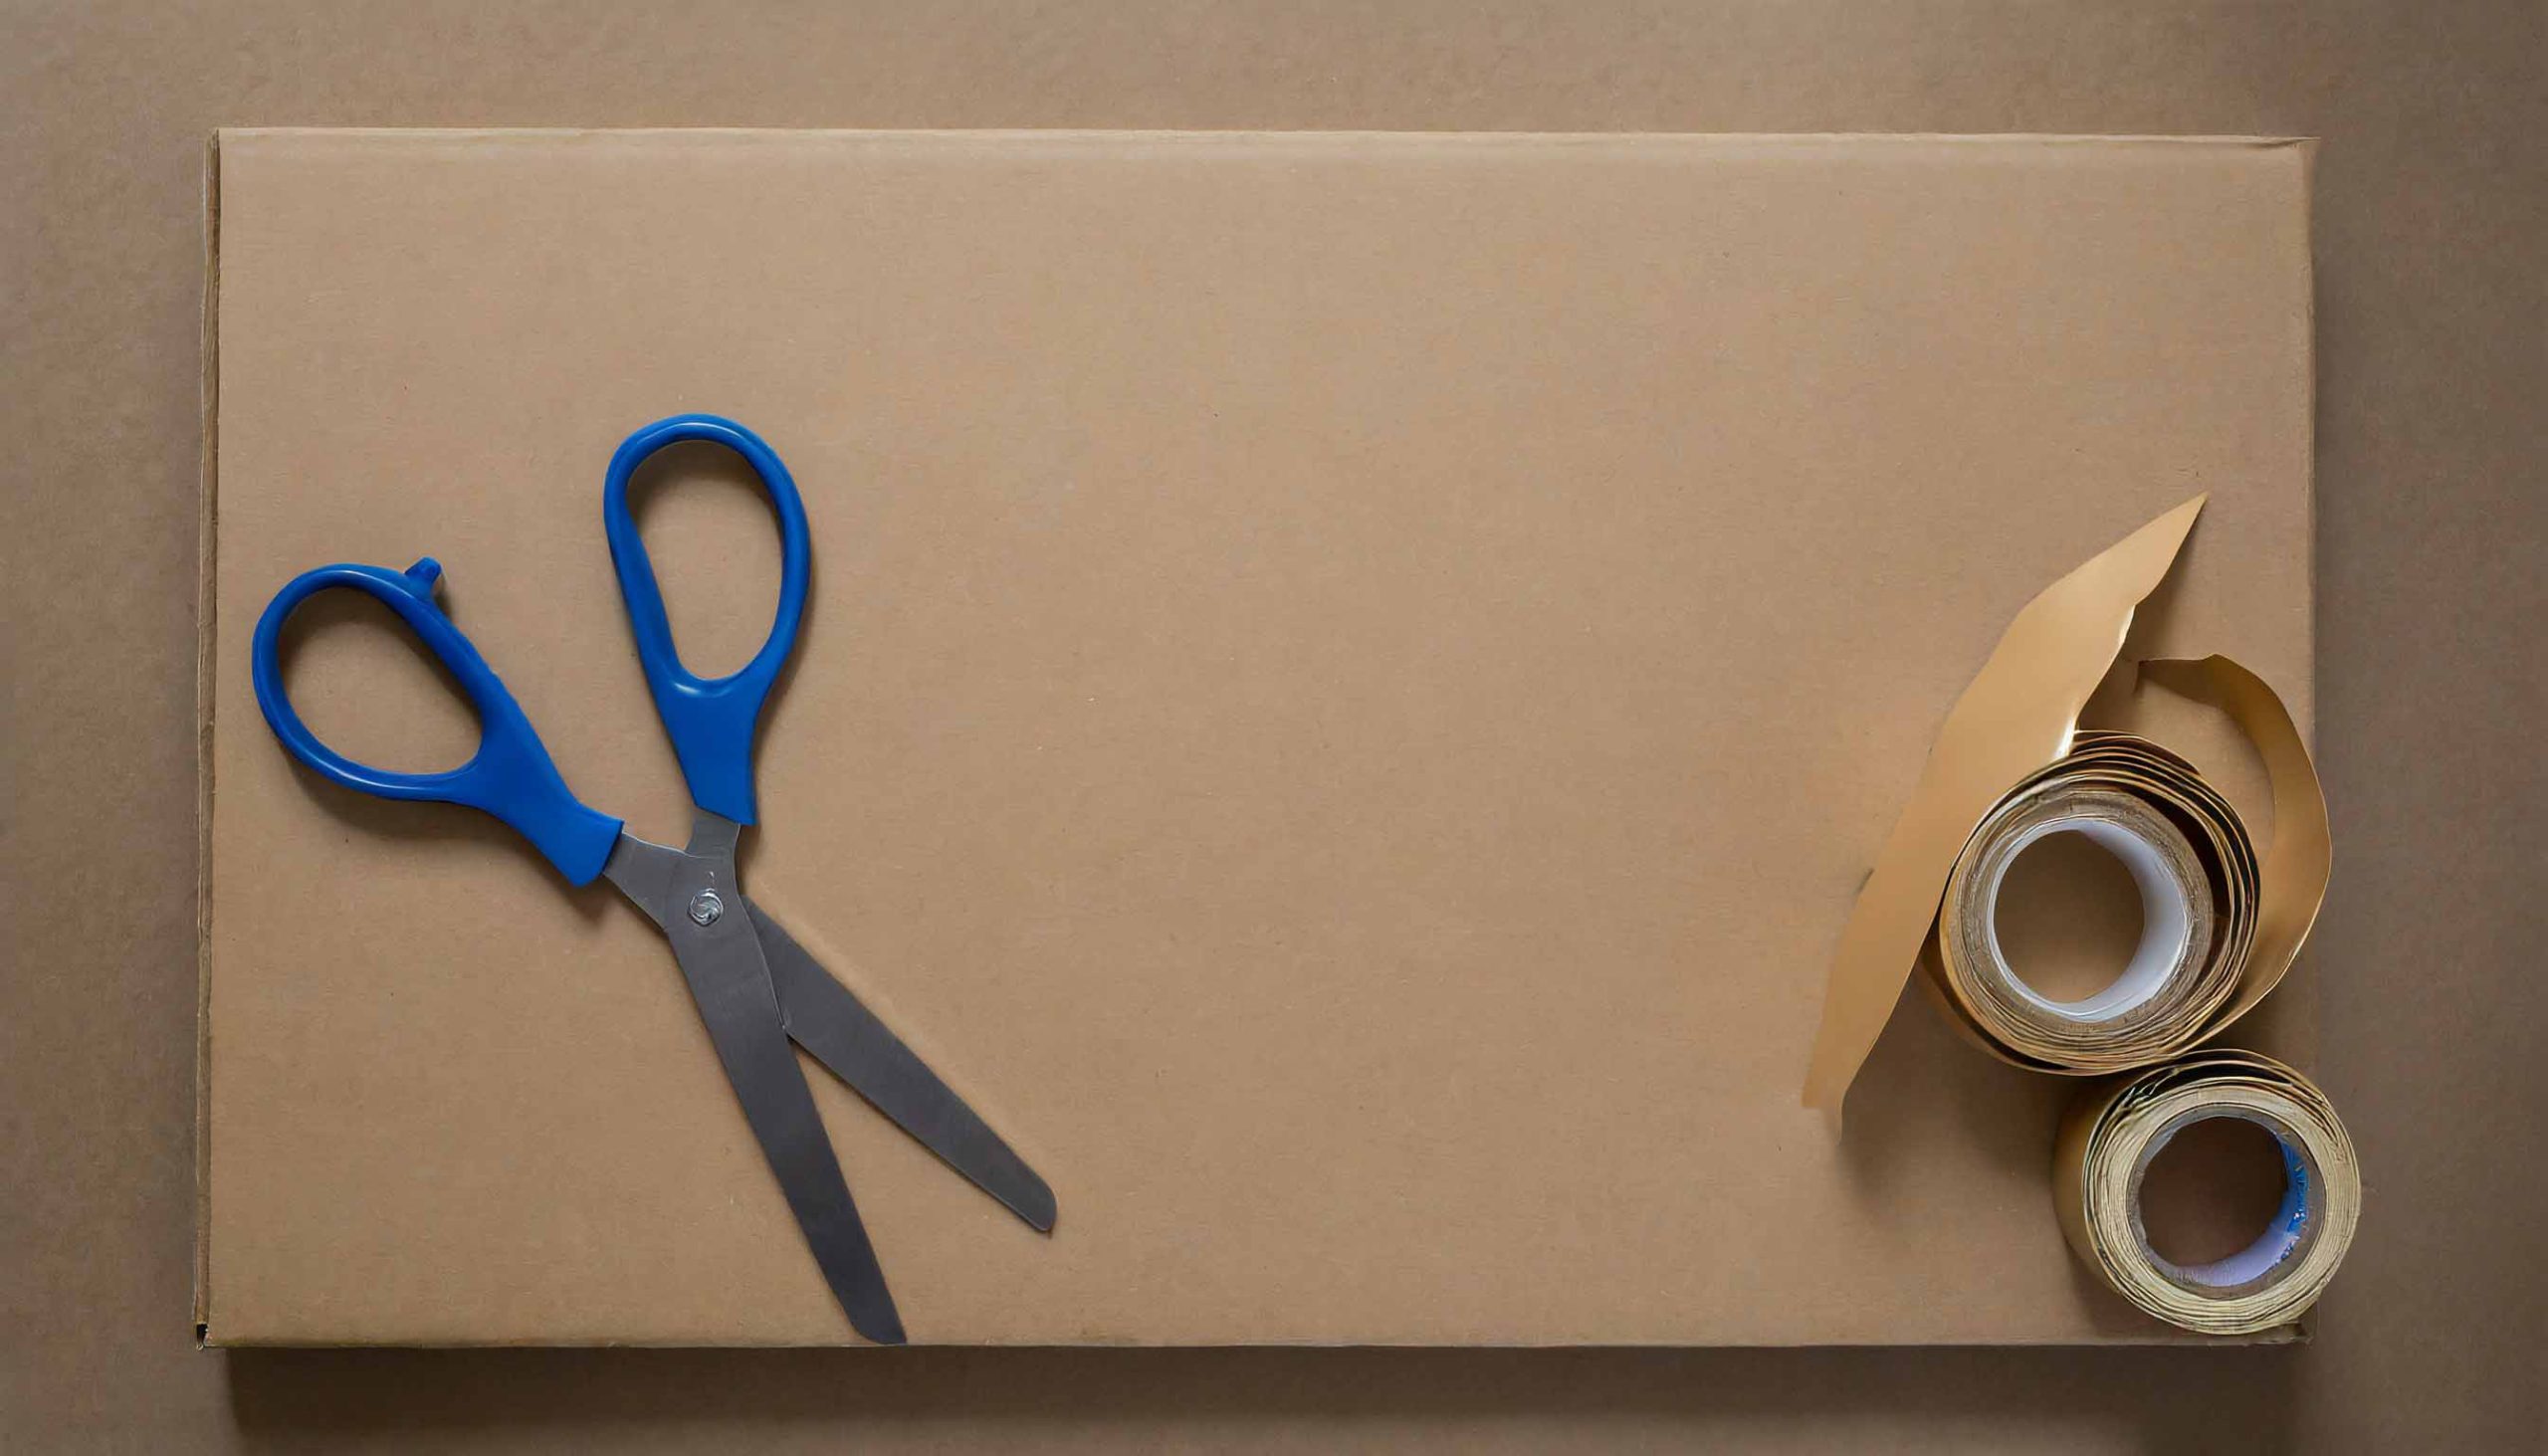 Brown paper background with scissors and wrapping tape taken from above.